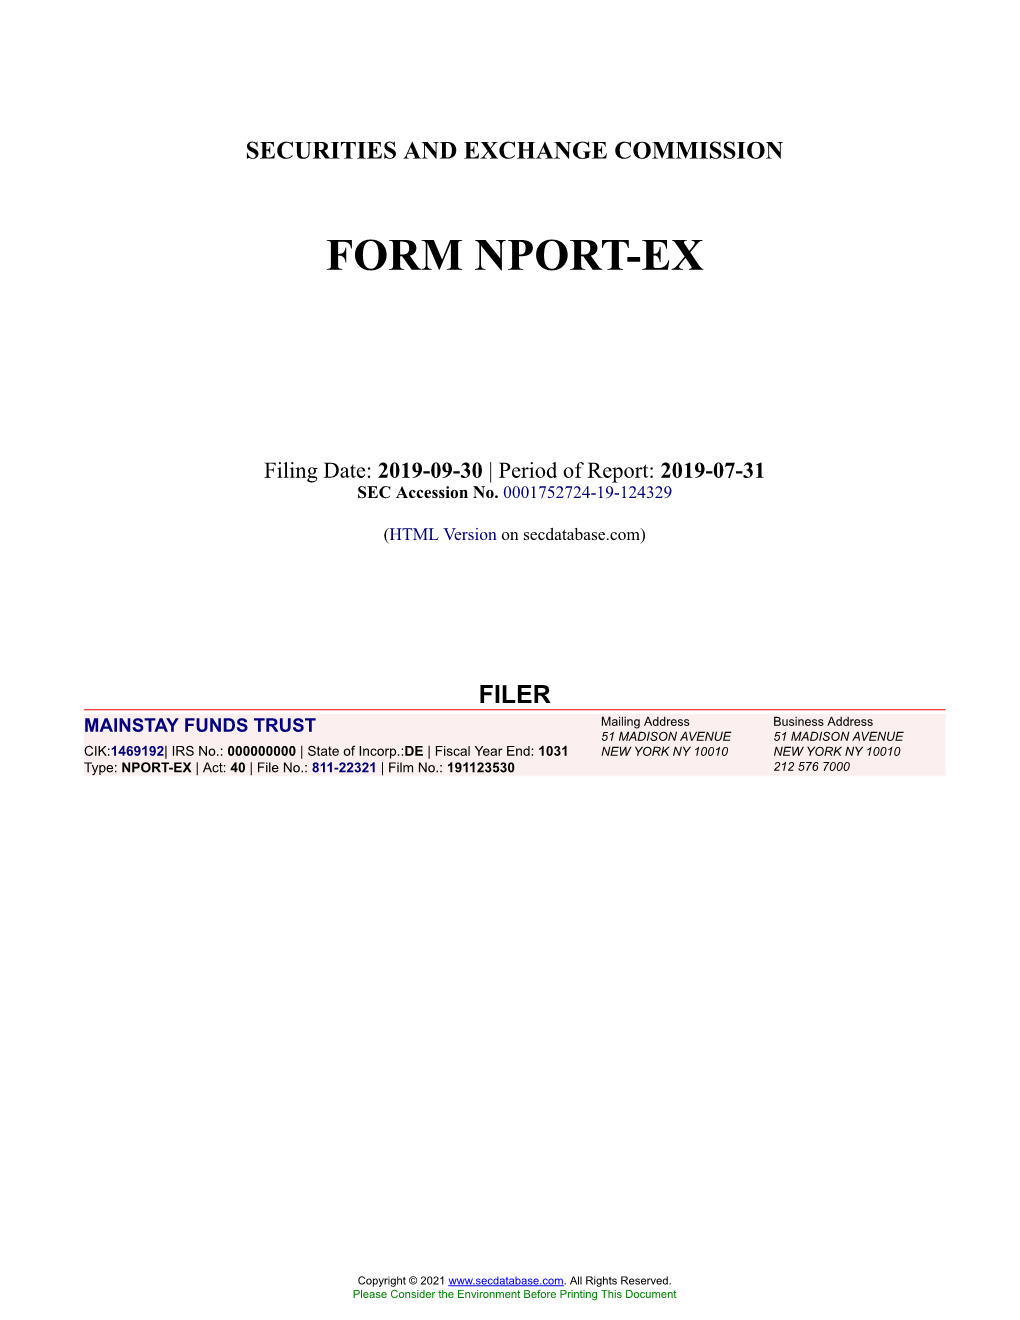 MAINSTAY FUNDS TRUST Form NPORT-EX Filed 2019-09-30